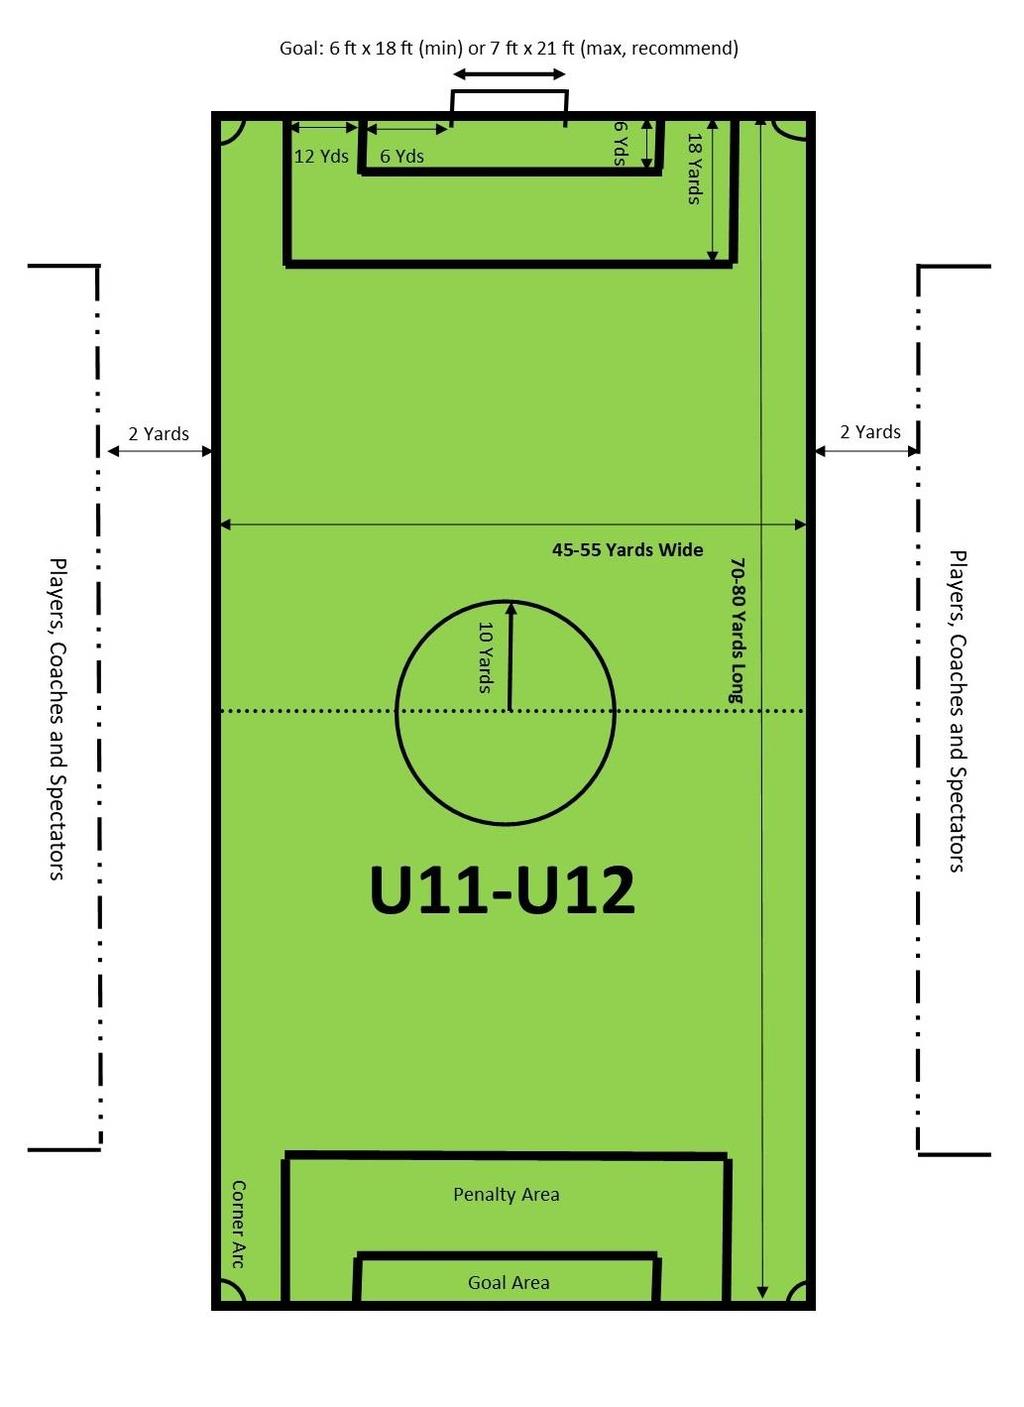 Small-Sided Field Dimensions